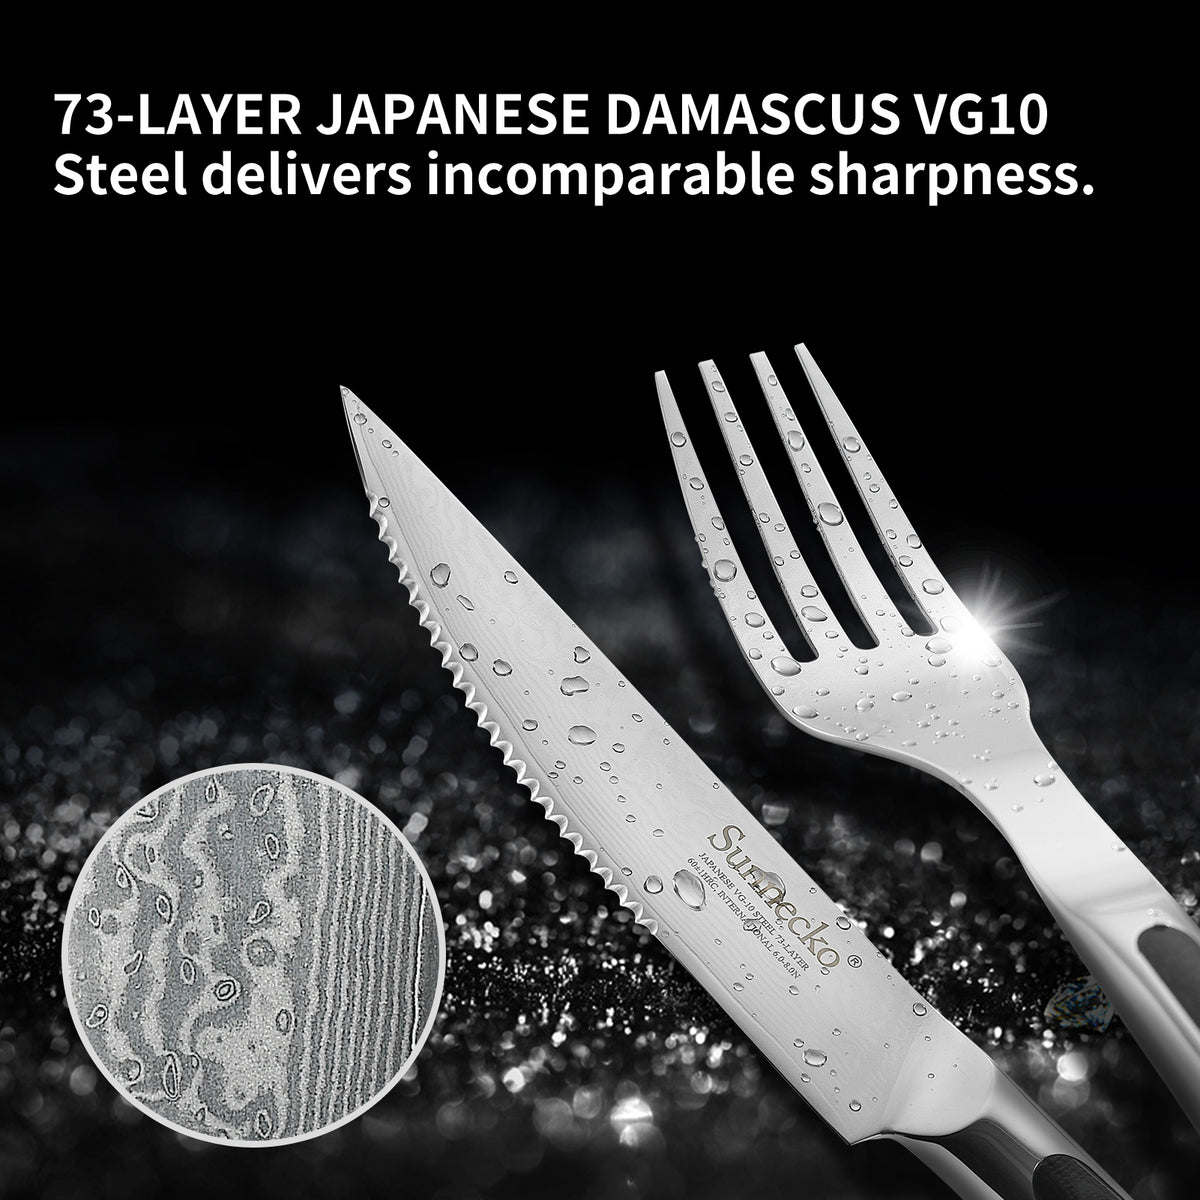  Sunnecko Damascus Steak Knife Set Non Serrated, Japanese VG10  Stainless Steel Steak Knife and Fork Set of 2, 5 Inch Steak Knives G10  Handle with Gift Box: Home & Kitchen